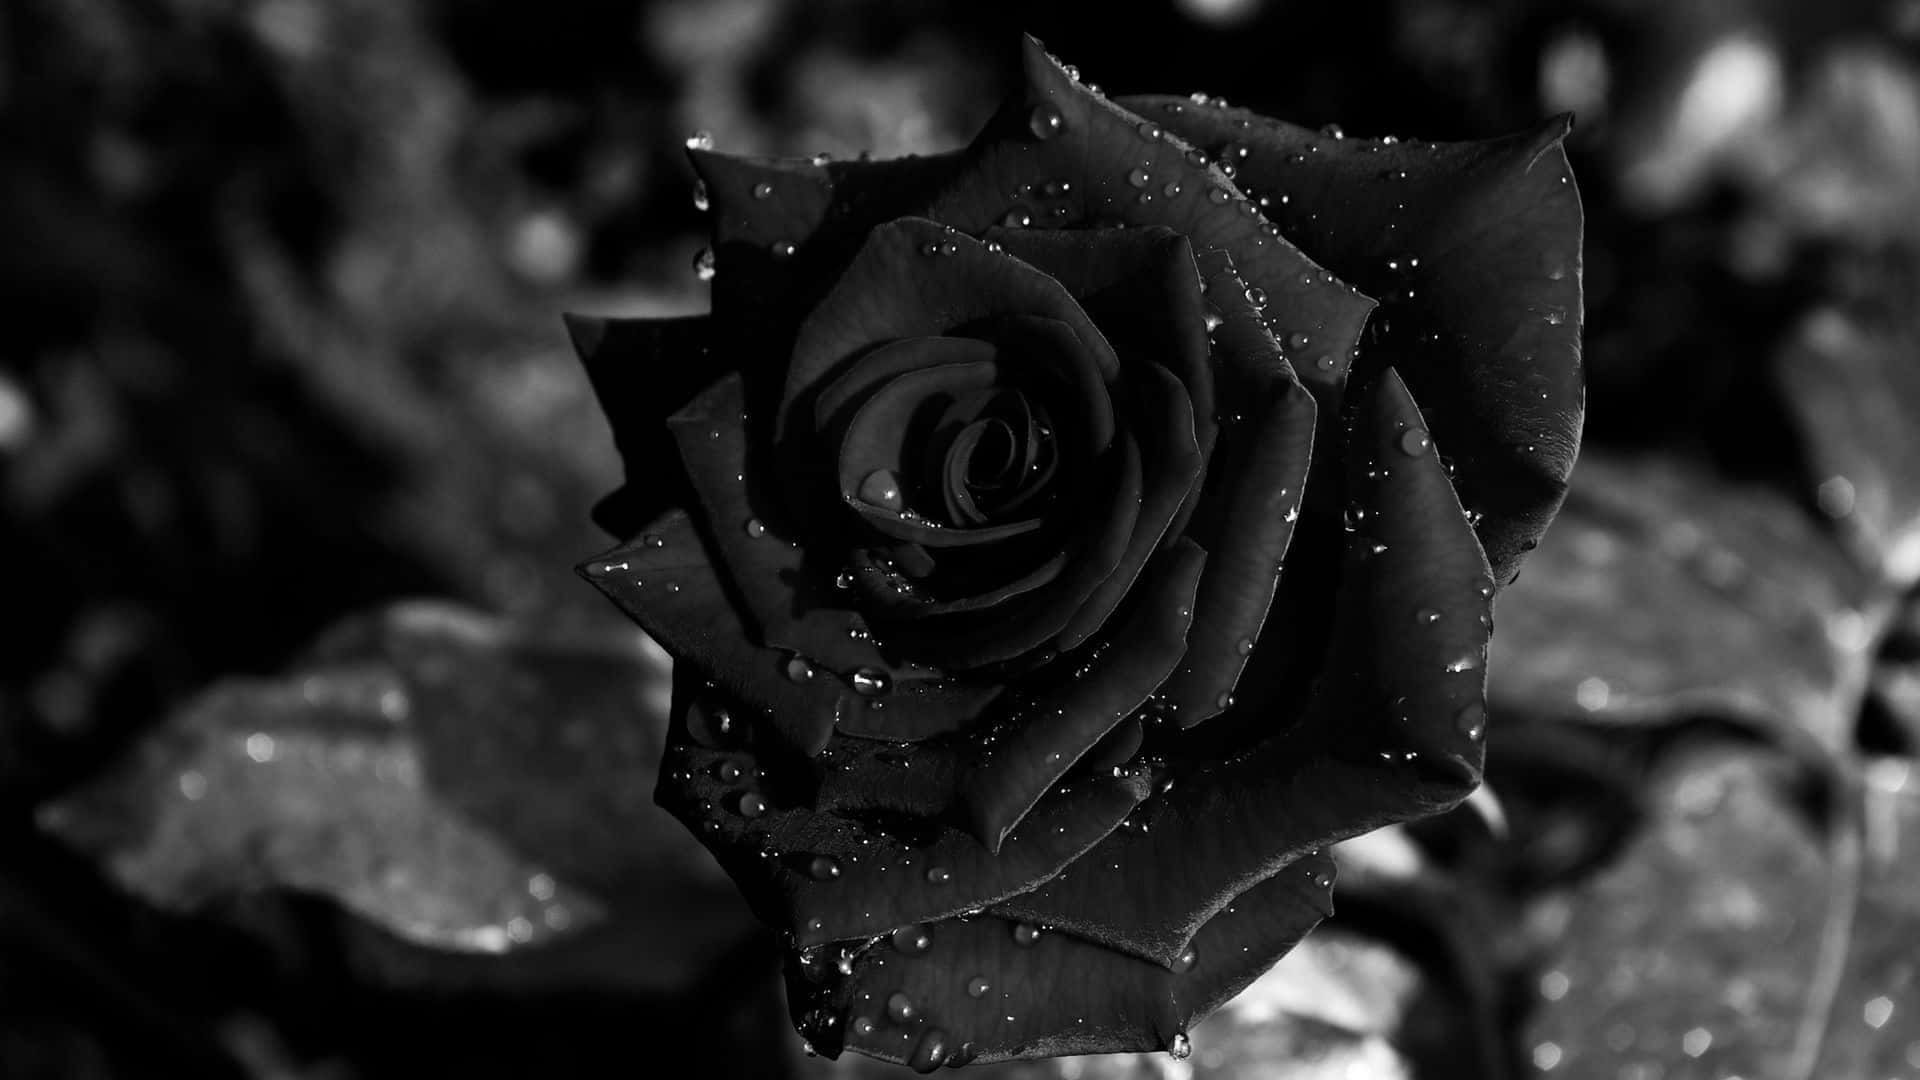 Black rose, its beauty is timeless